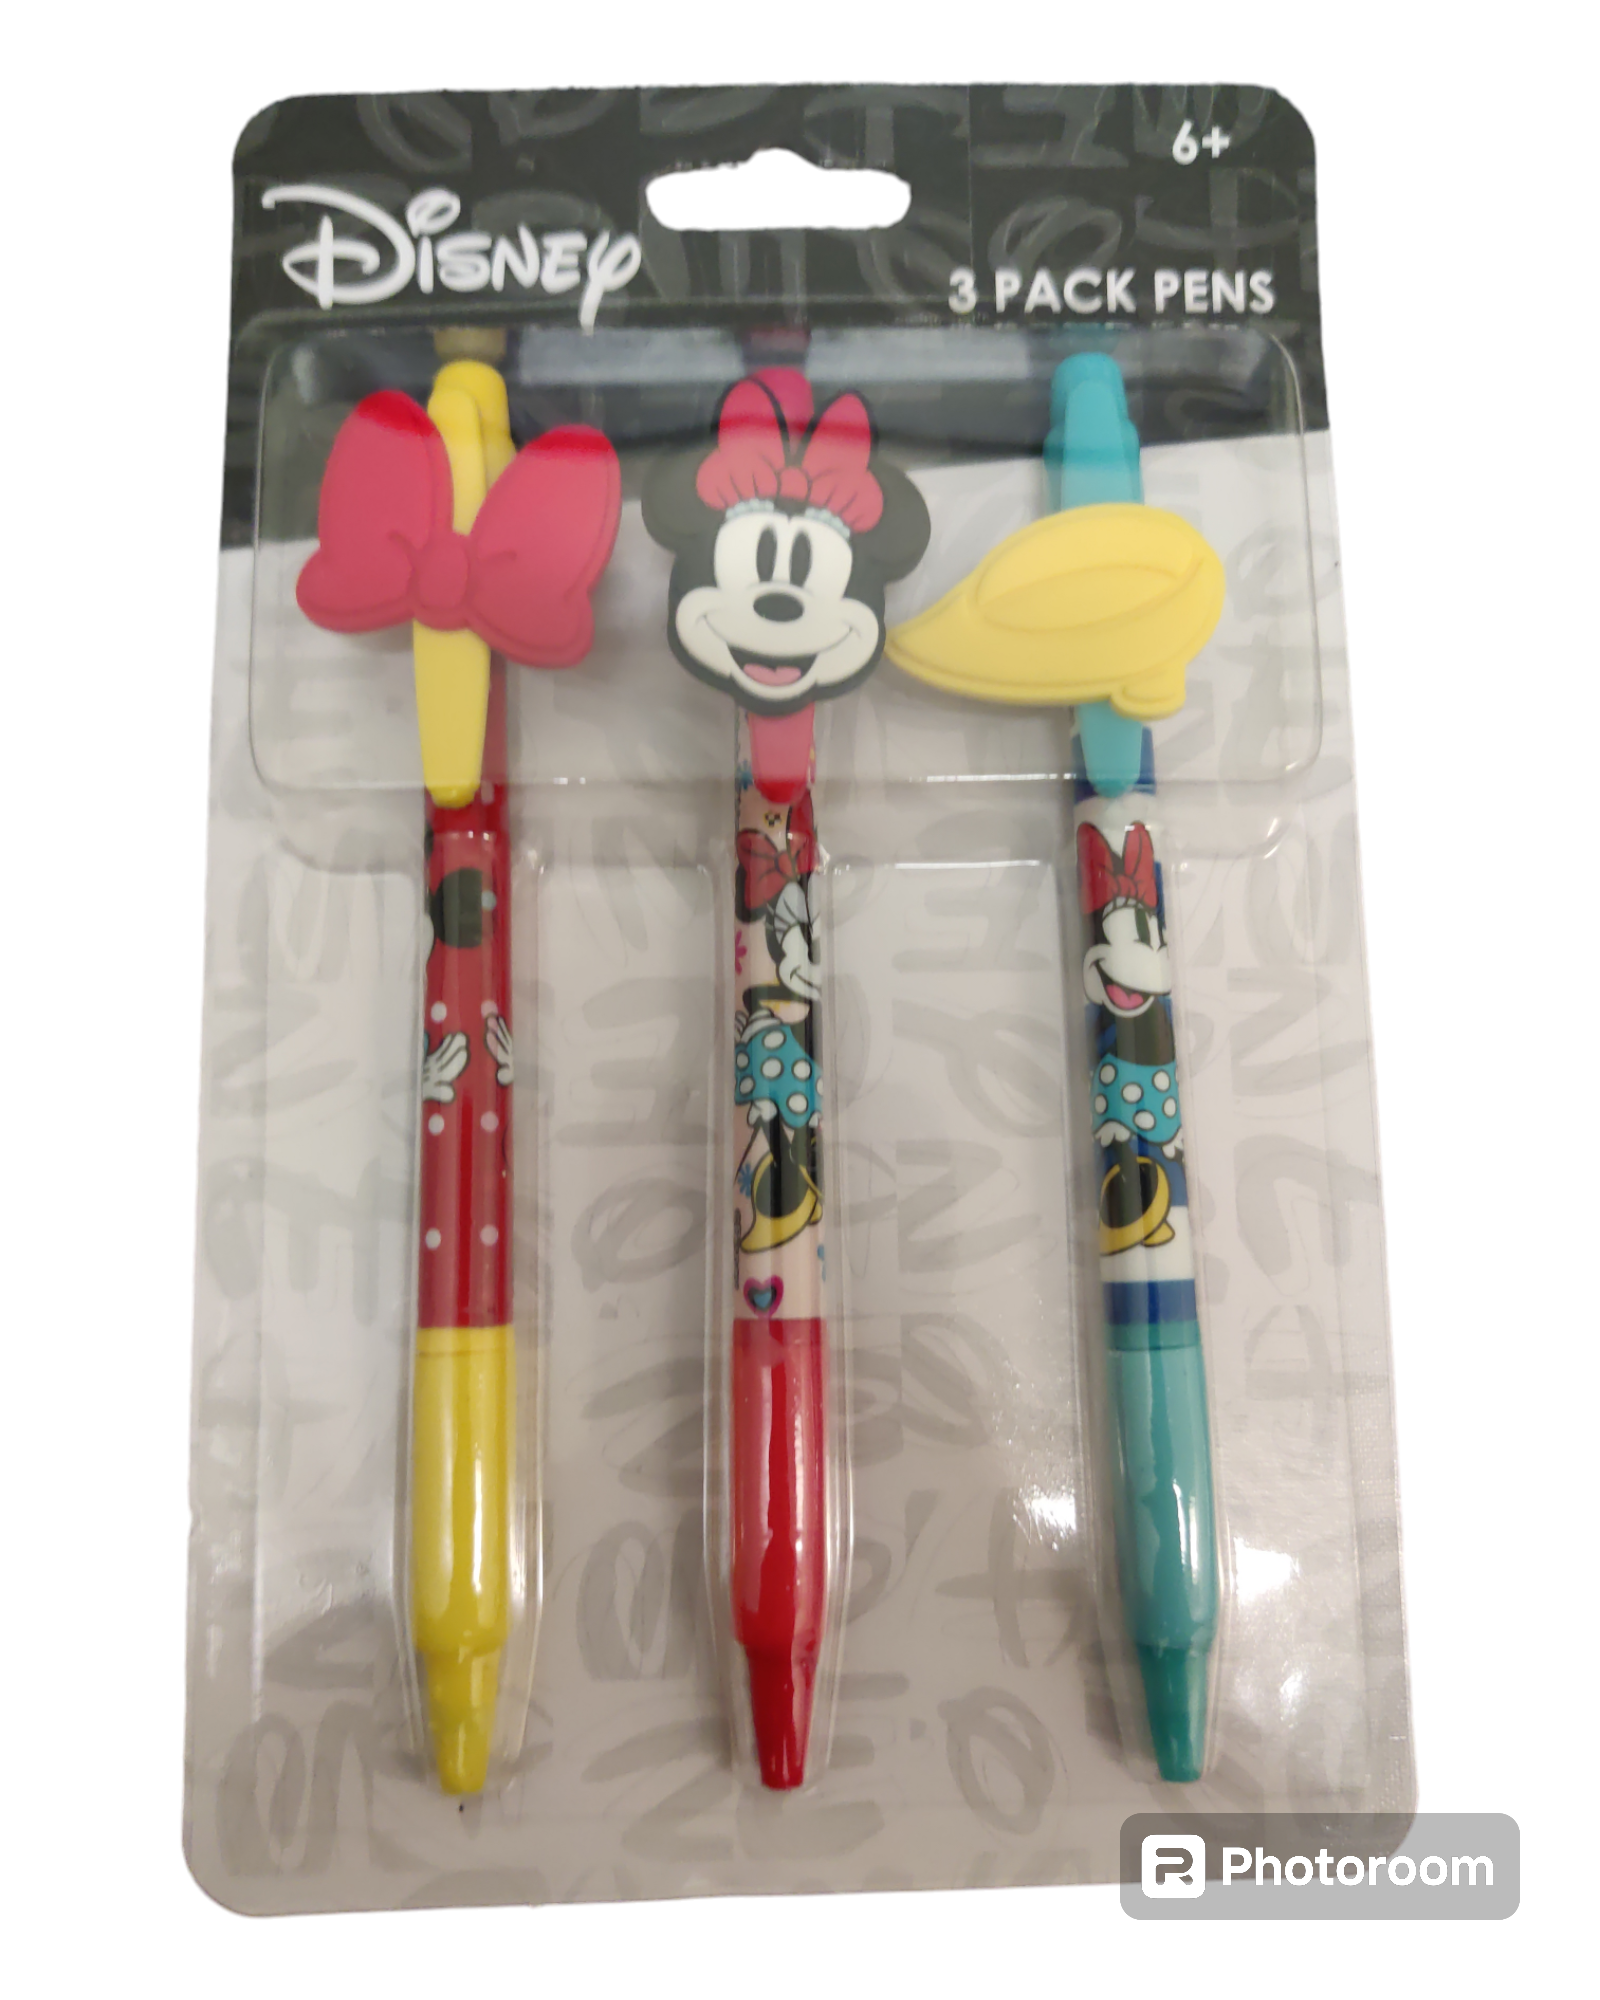 Minnie Mouse 3 Pack of Pen with Rubber Character